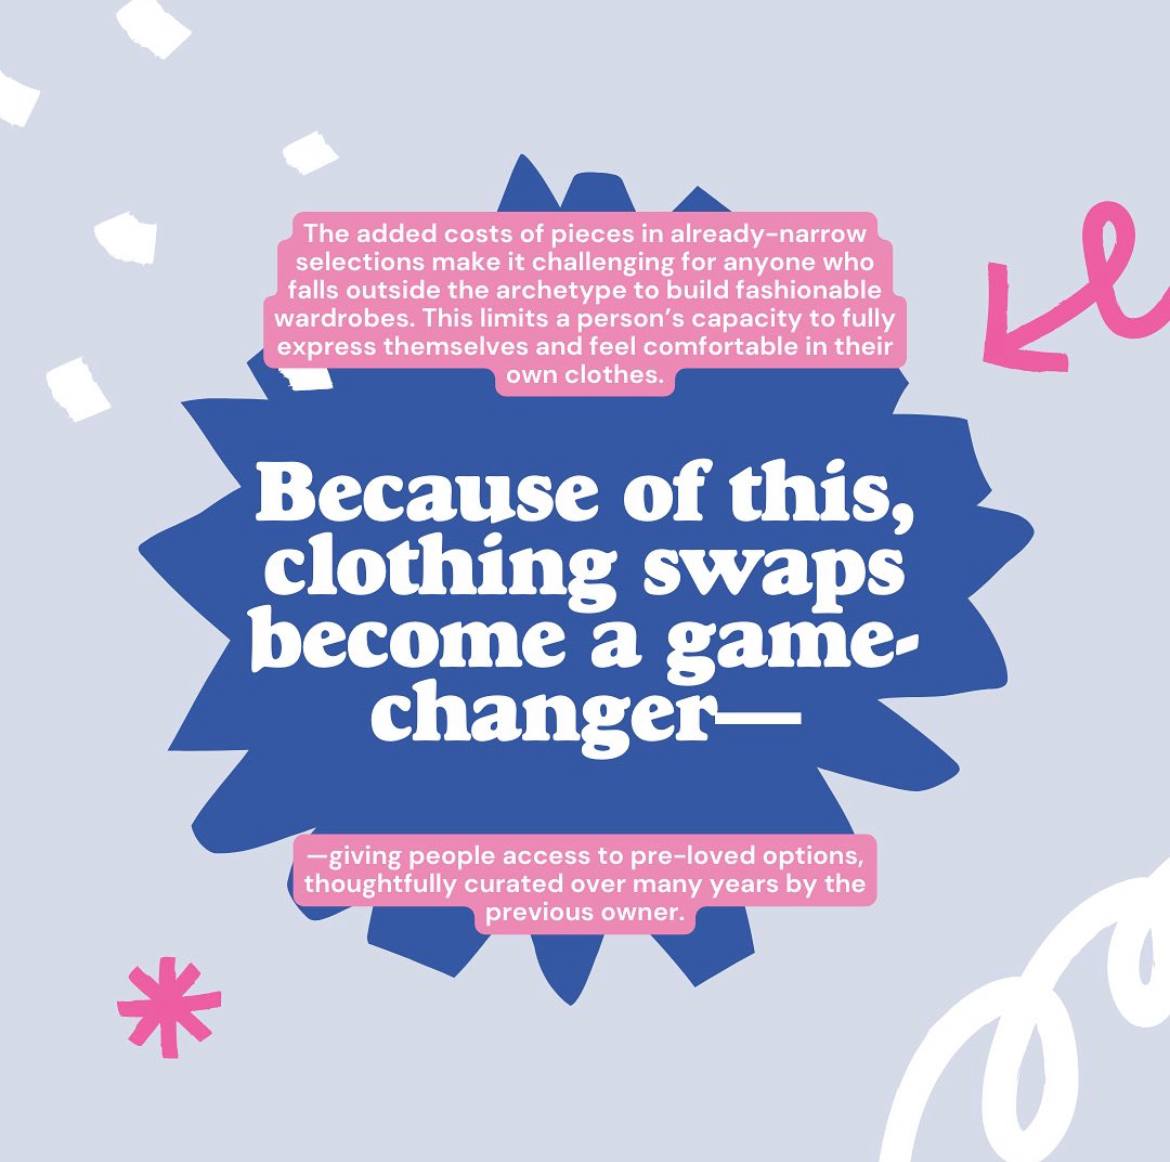 clothes swap and inclusive fashion, sustainable fashion